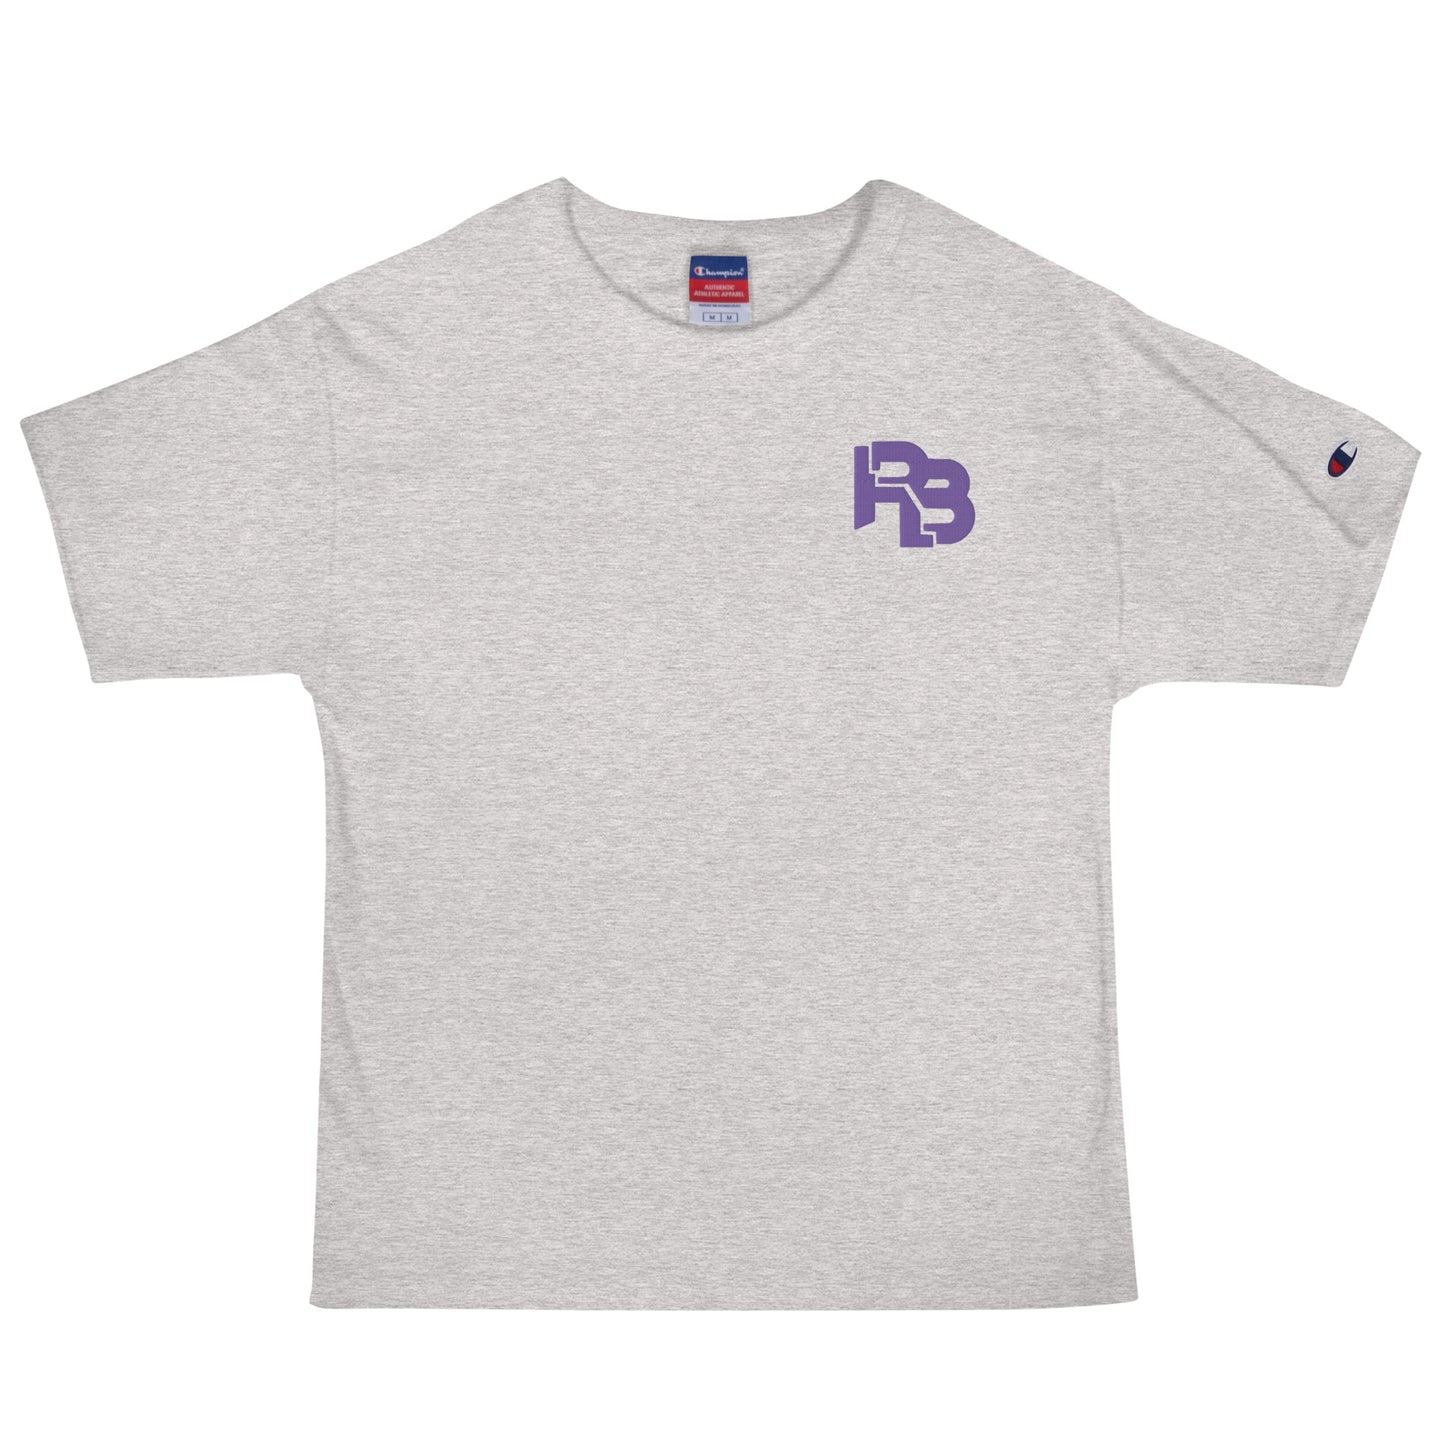 RB Embroidered Men's Champion T-Shirt